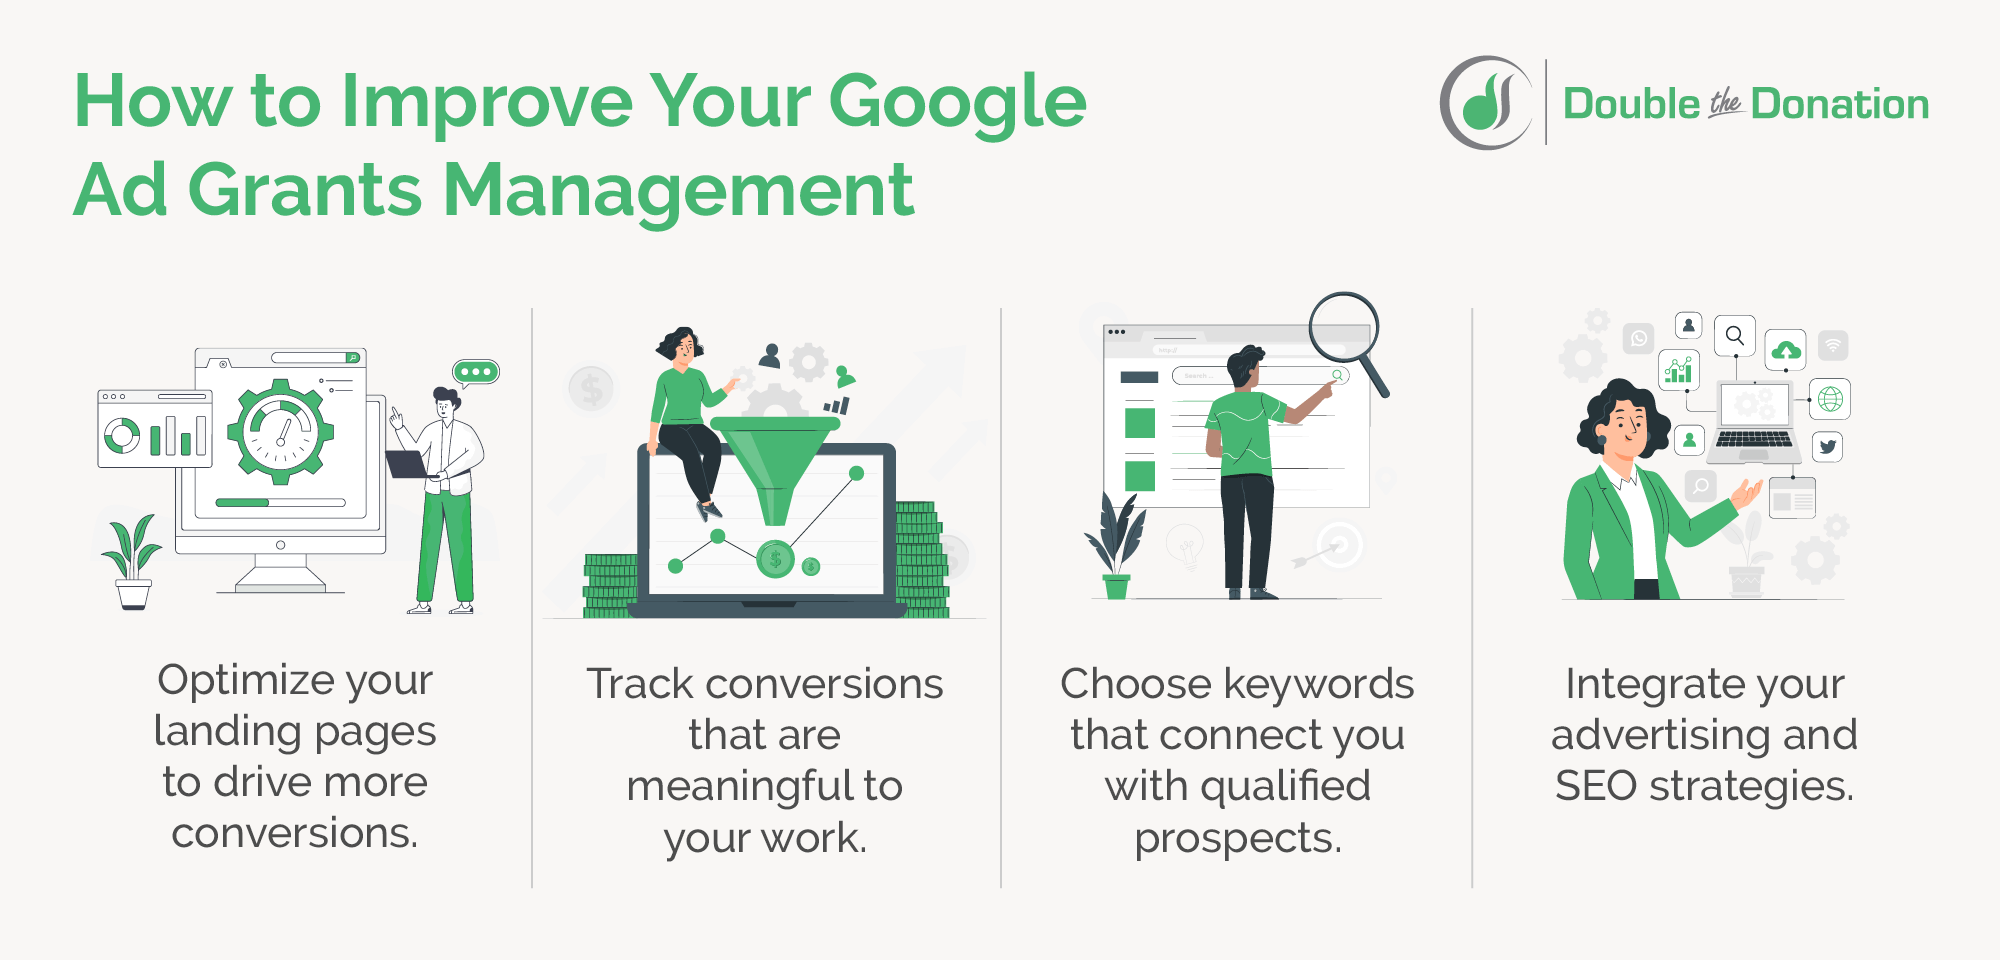 Make the most of your eligibility by practicing these Google Ad Grants management tips.